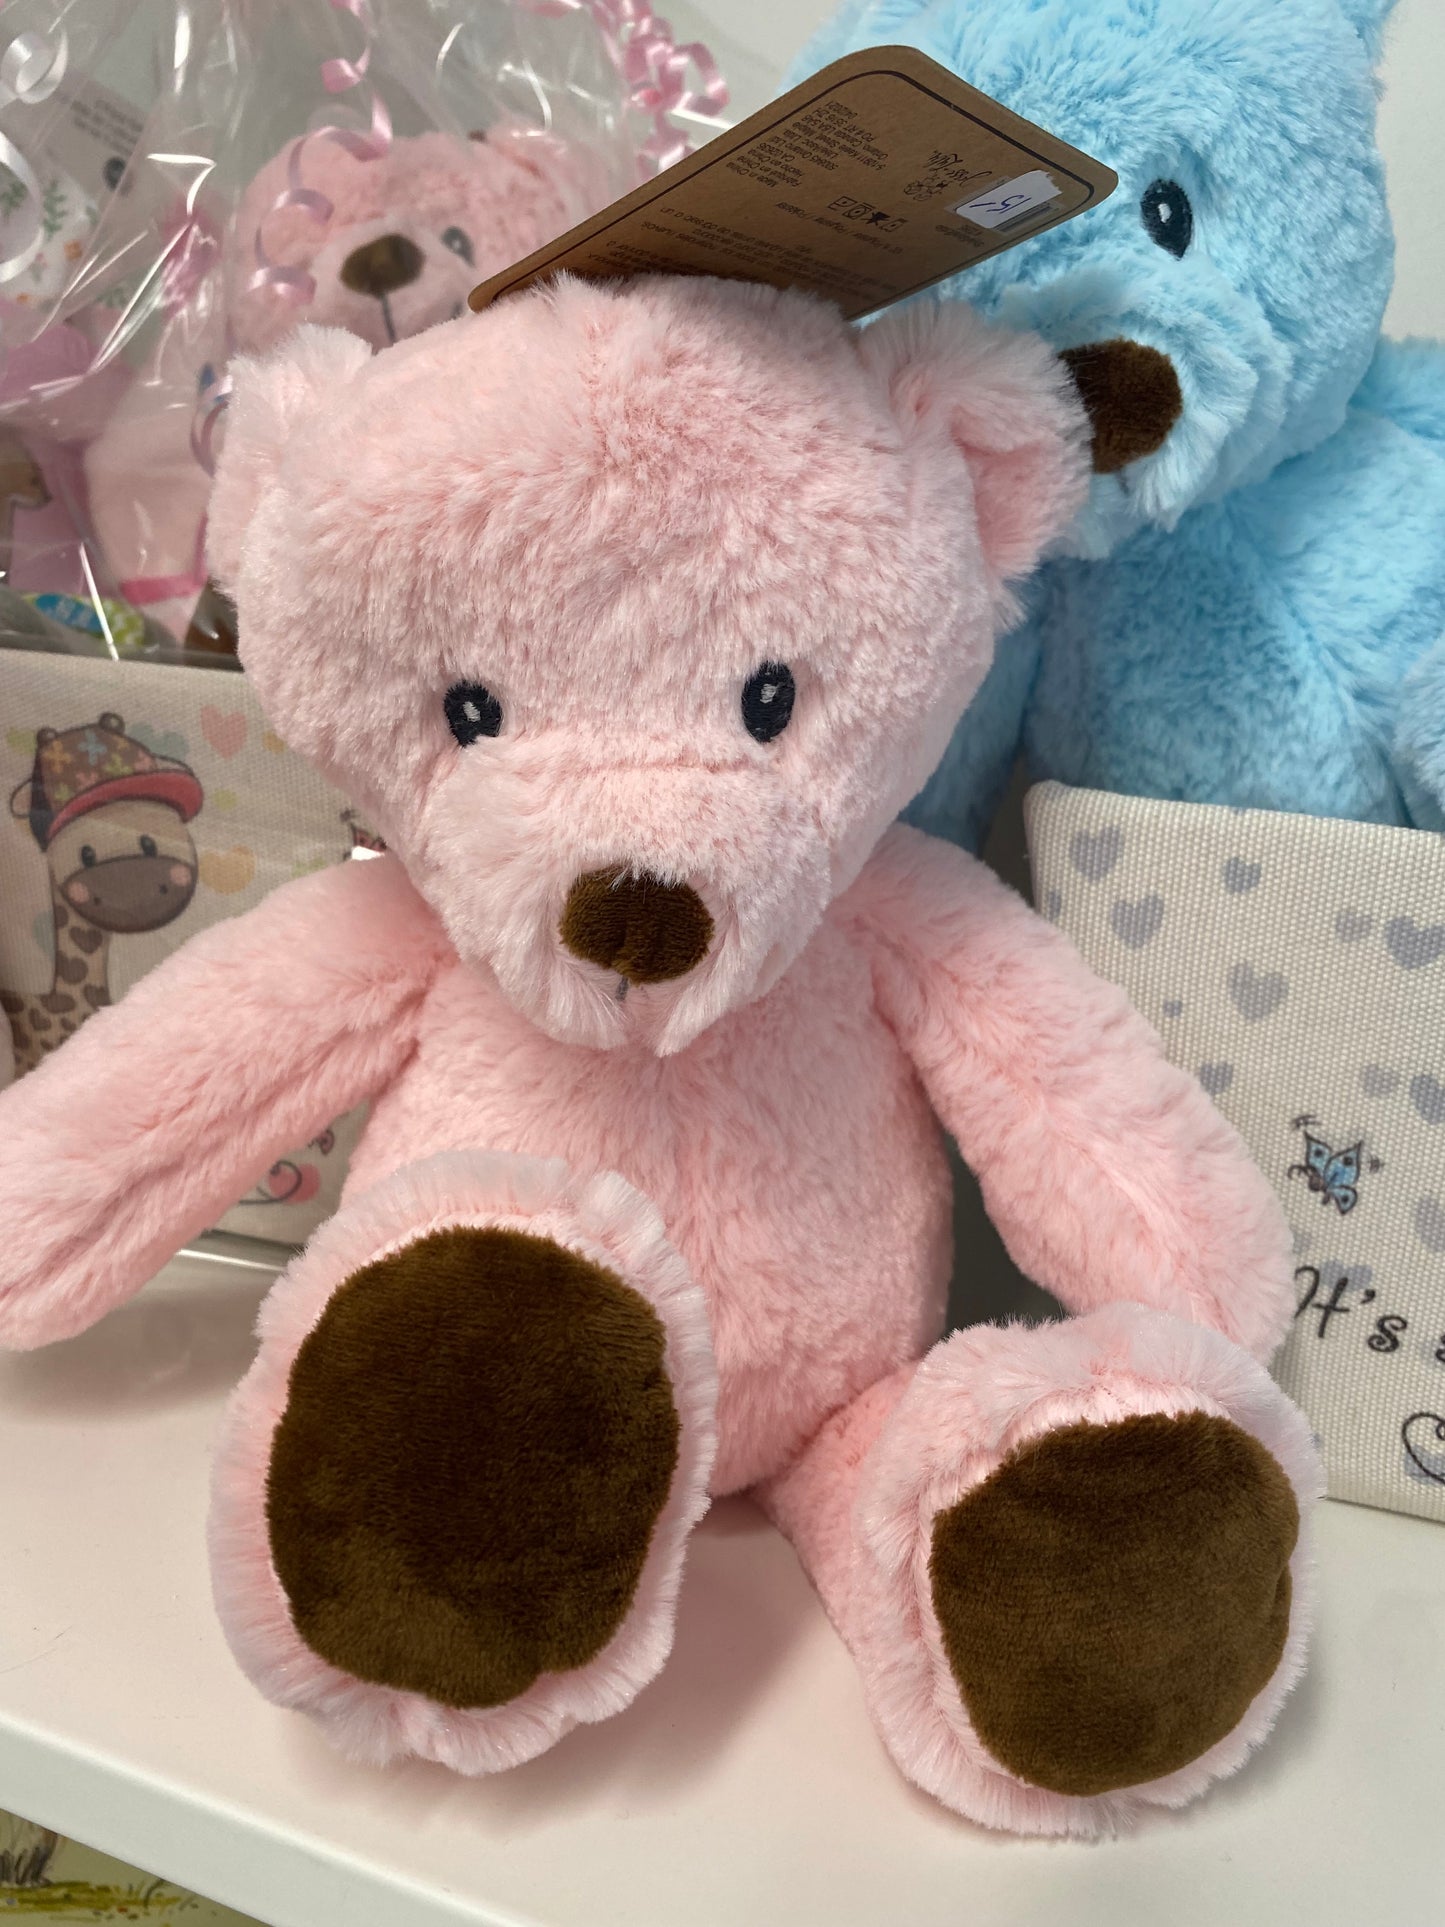 Plush Teddy Bears, Available in Pink and Blue